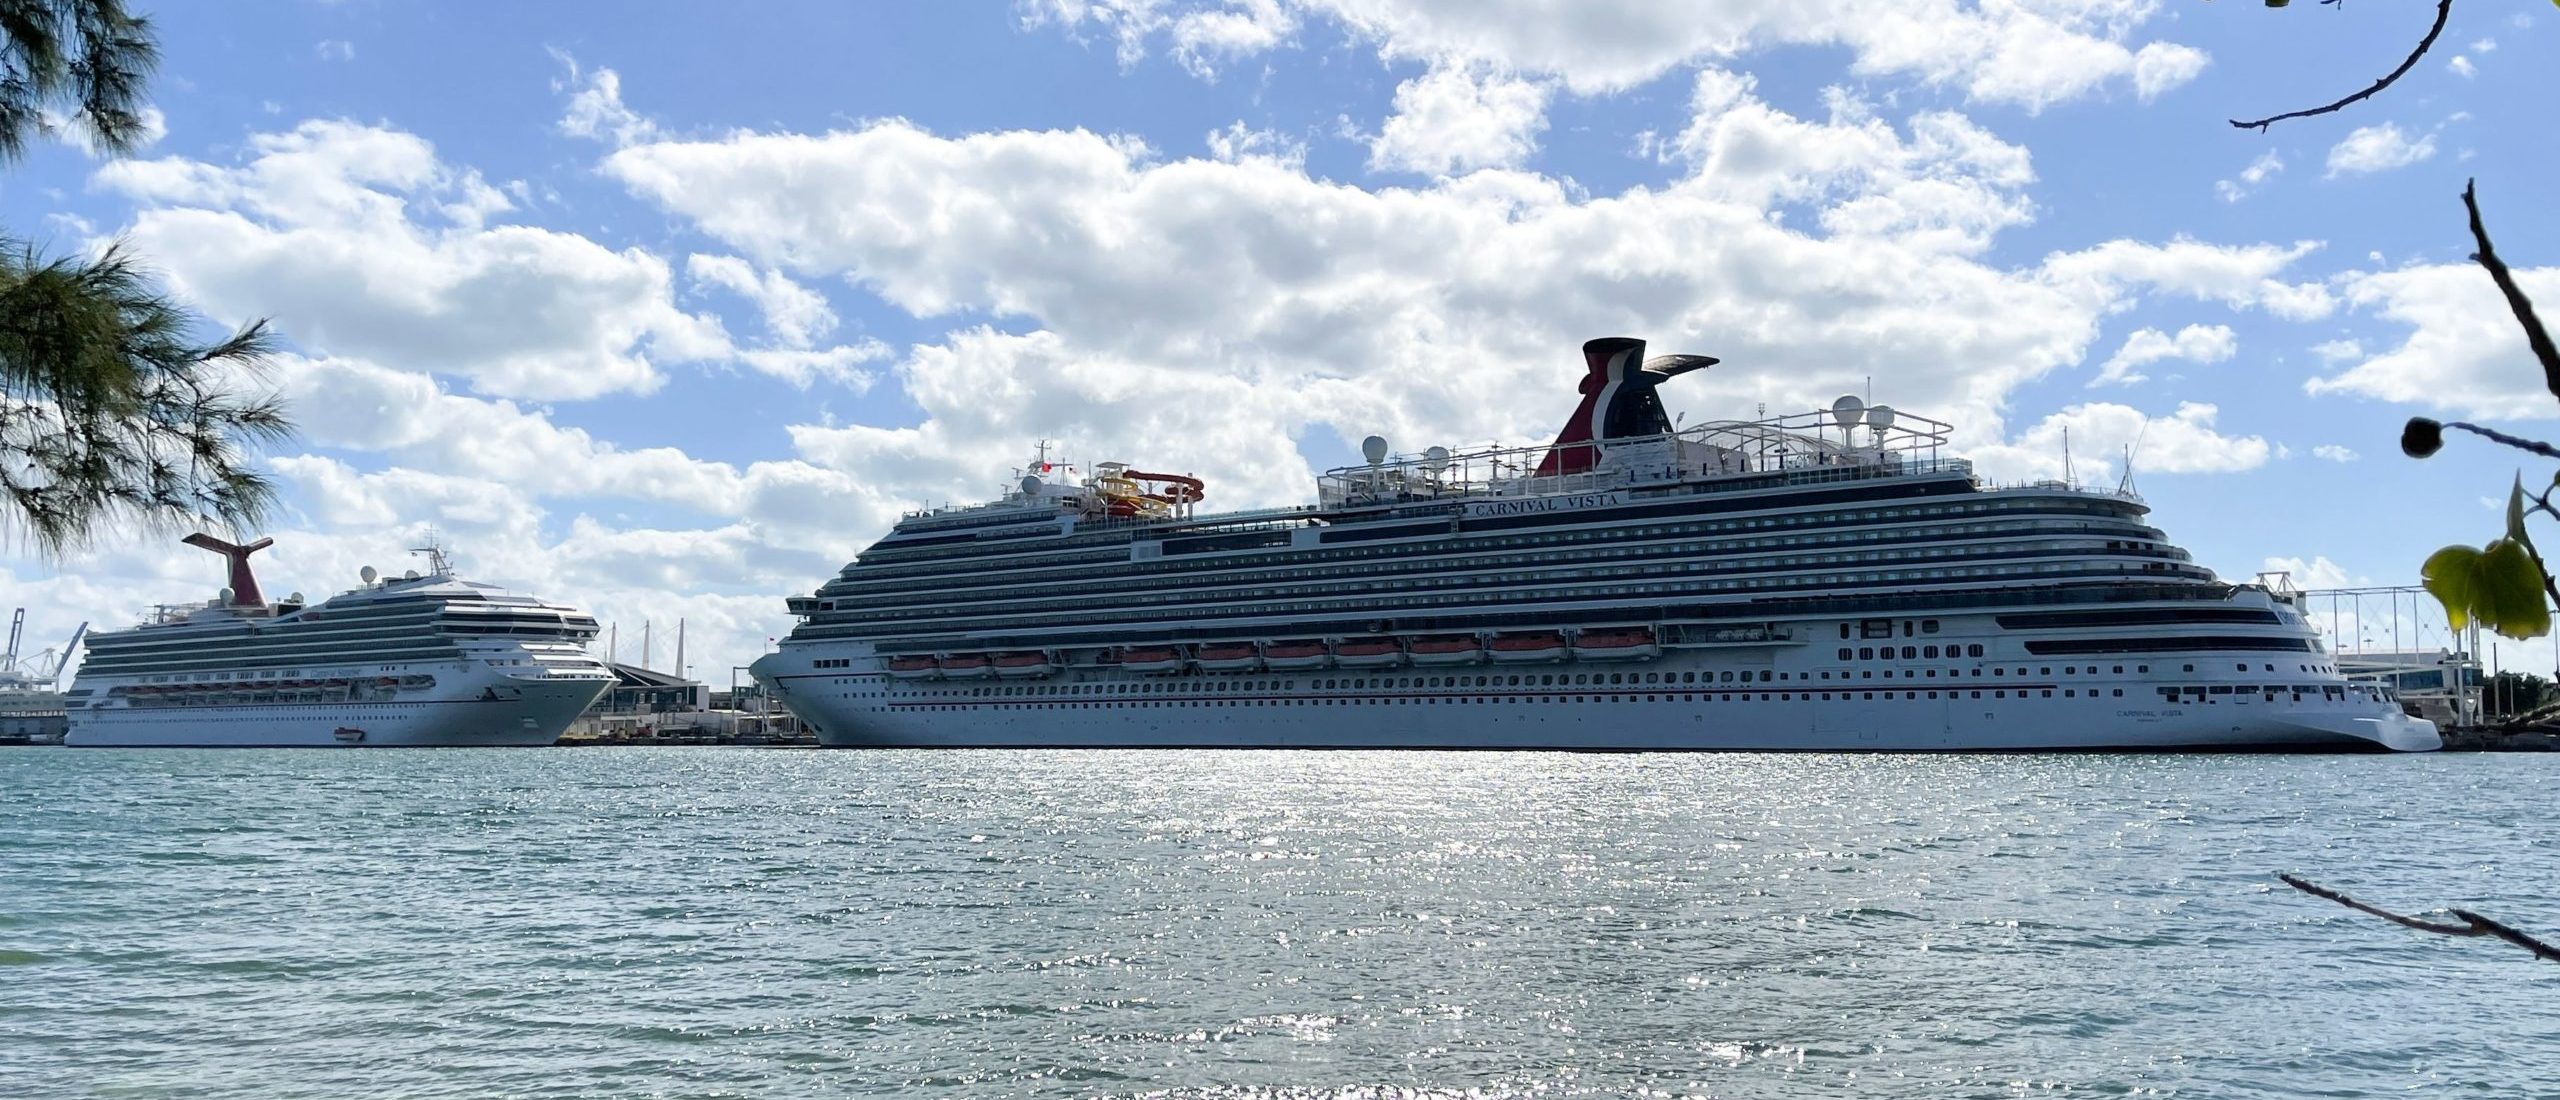 27 People Aboard Almost Fully Vaccinated Cruise Ship Test Positive For